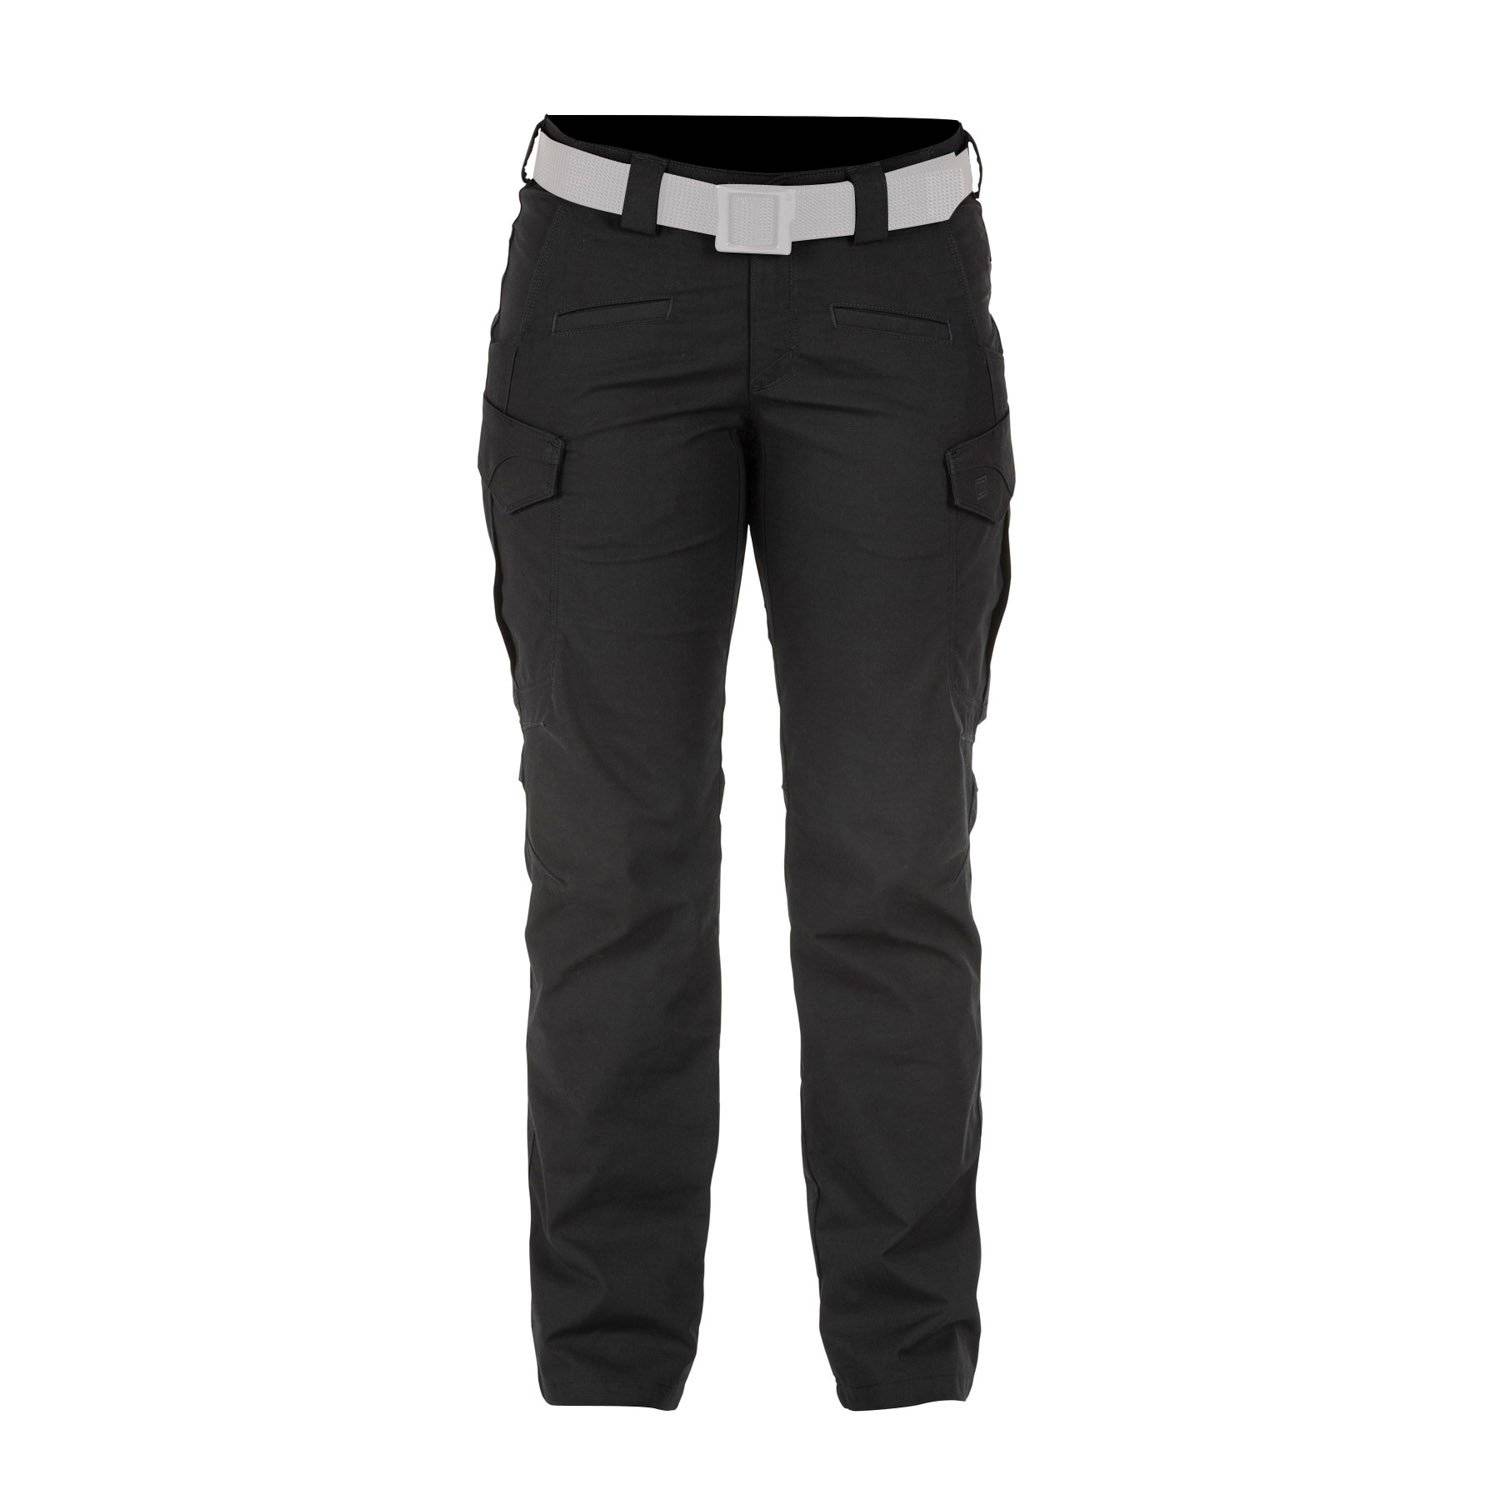 5.11 TACTICAL WOMEN'S ICON PANT